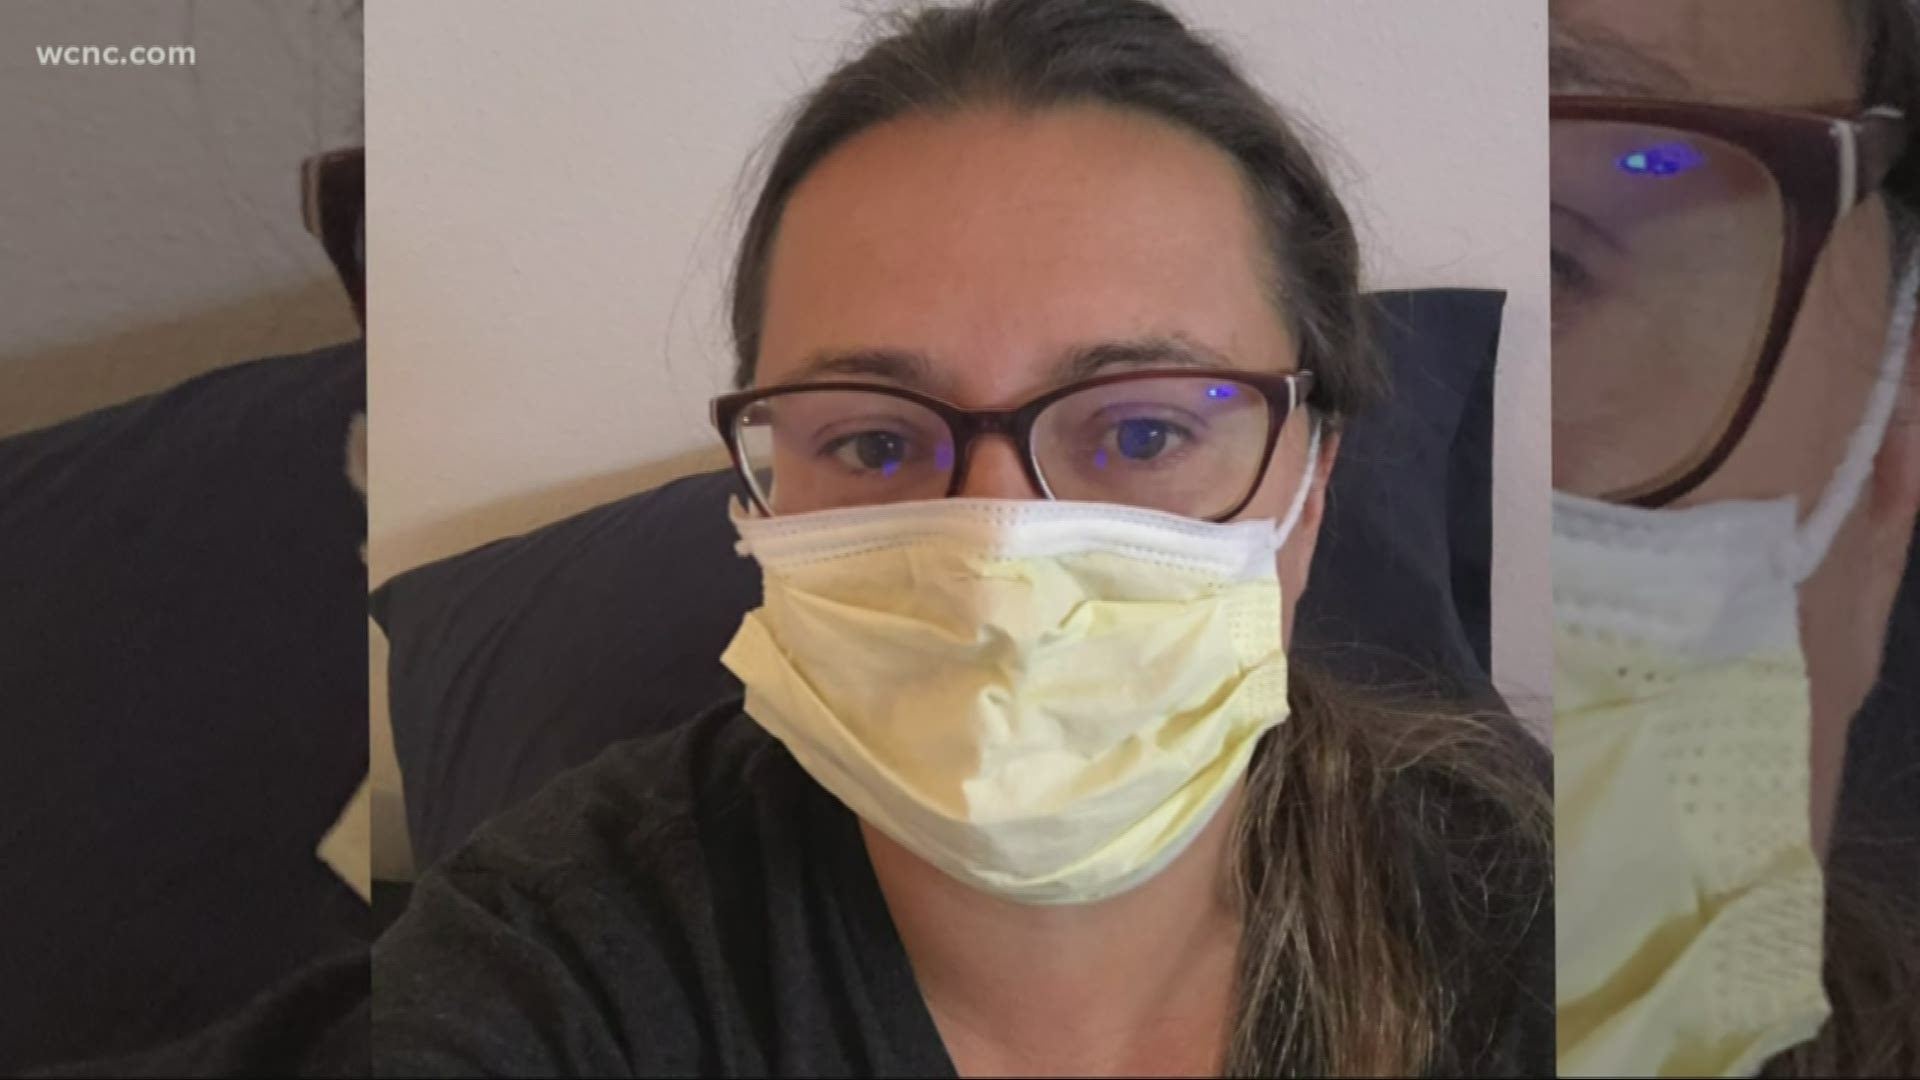 A 42-year-old woman says she is confident she has COVID-19, but doctors denied her a test because her symptoms weren't severe enough.